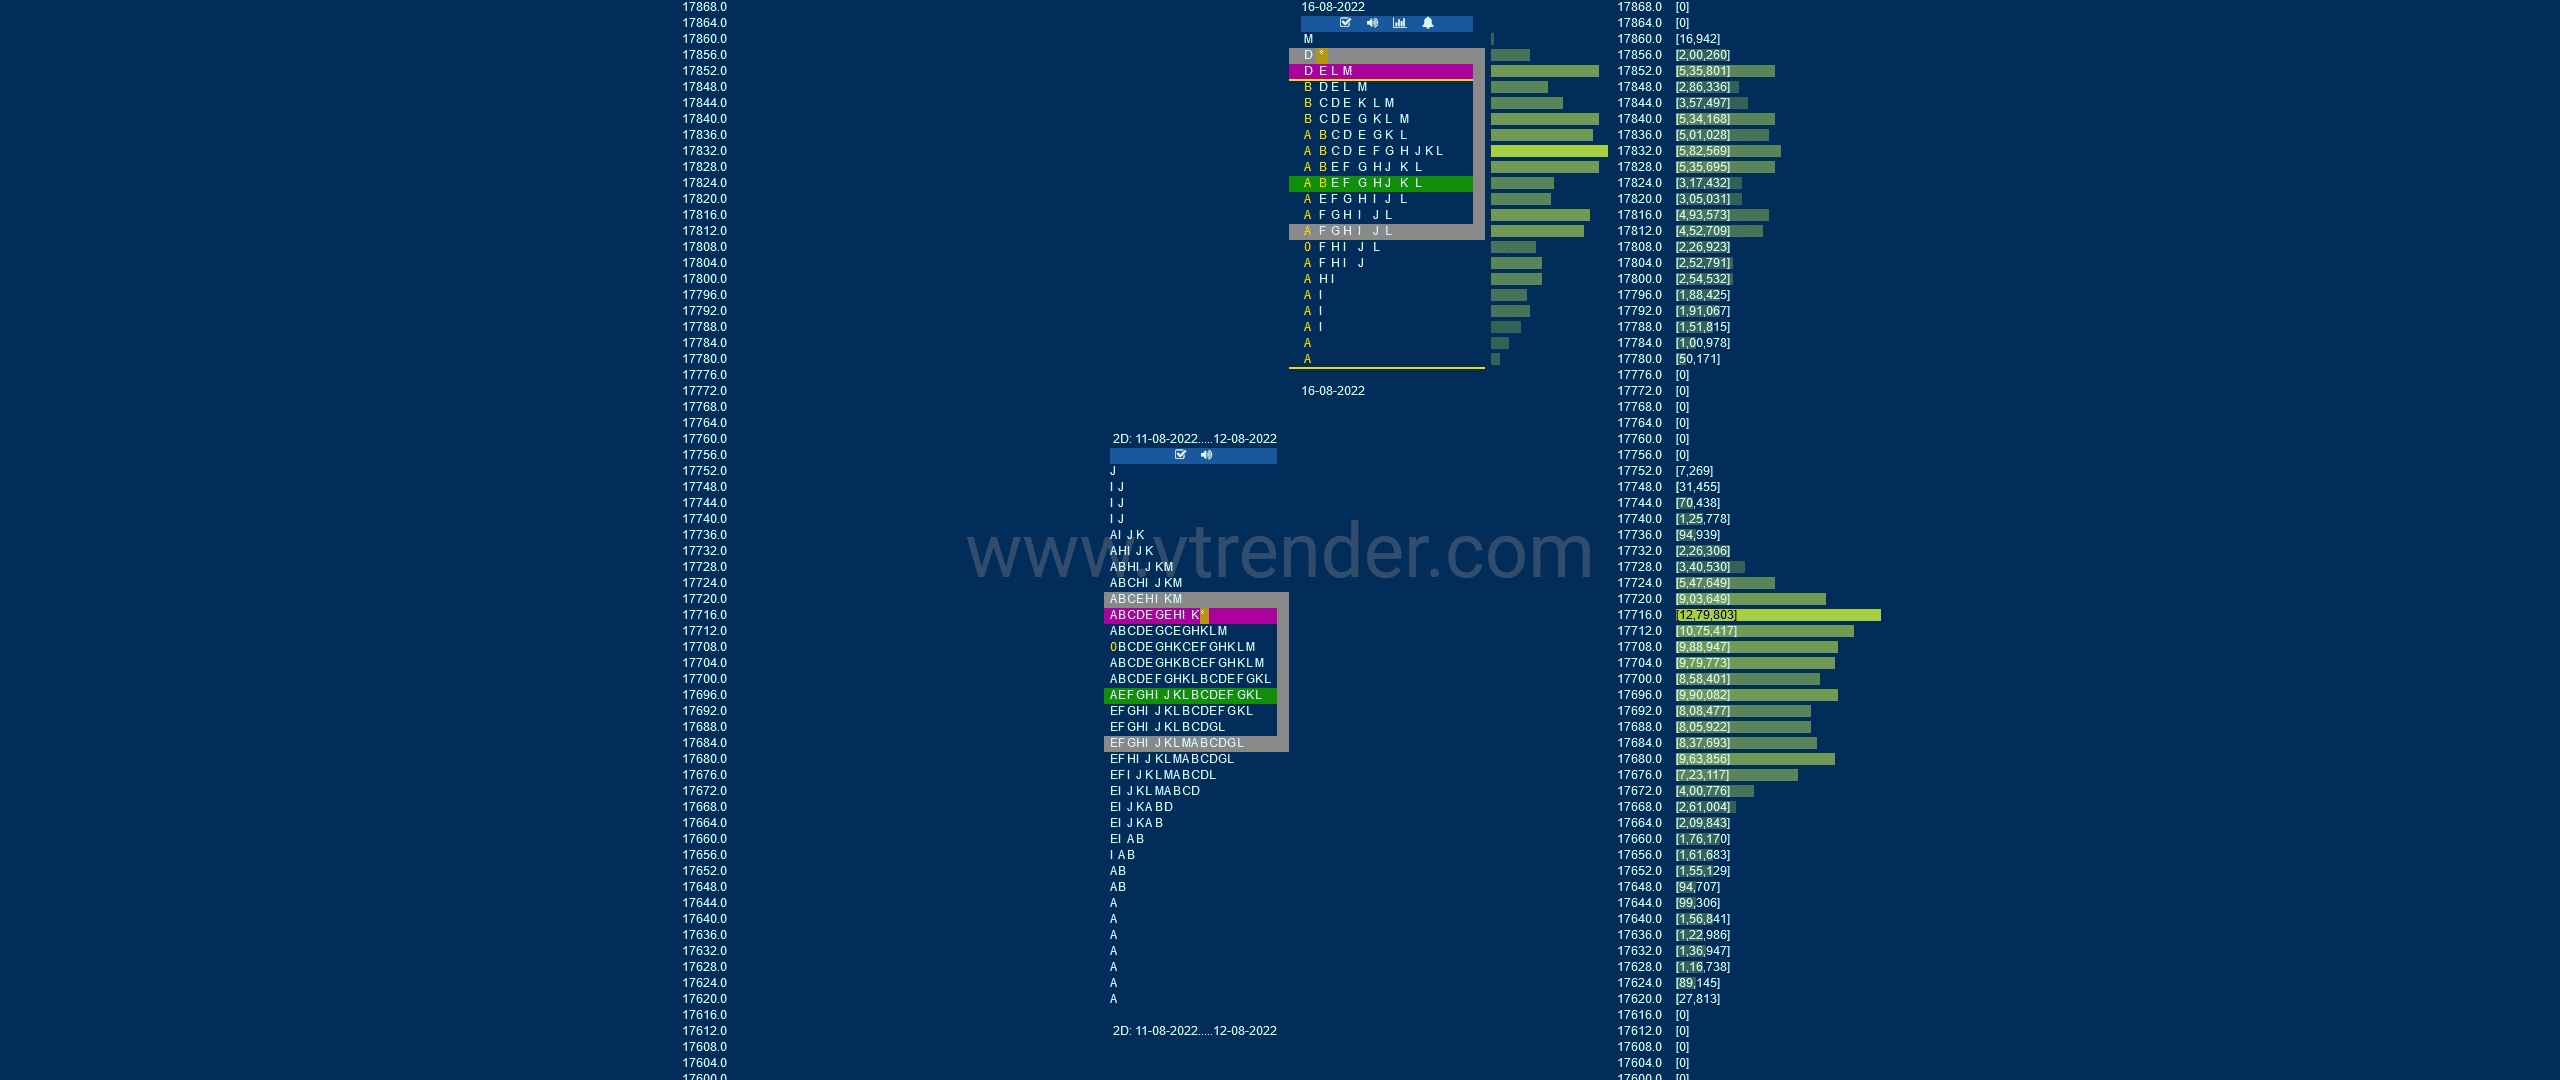 Nf 10 Market Profile Analysis Dated 16Th Aug 2022 Banknifty Futures, Charts, Day Trading, Intraday Trading, Intraday Trading Strategies, Market Profile, Market Profile Trading Strategies, Nifty Futures, Order Flow Analysis, Support And Resistance, Technical Analysis, Trading Strategies, Volume Profile Trading